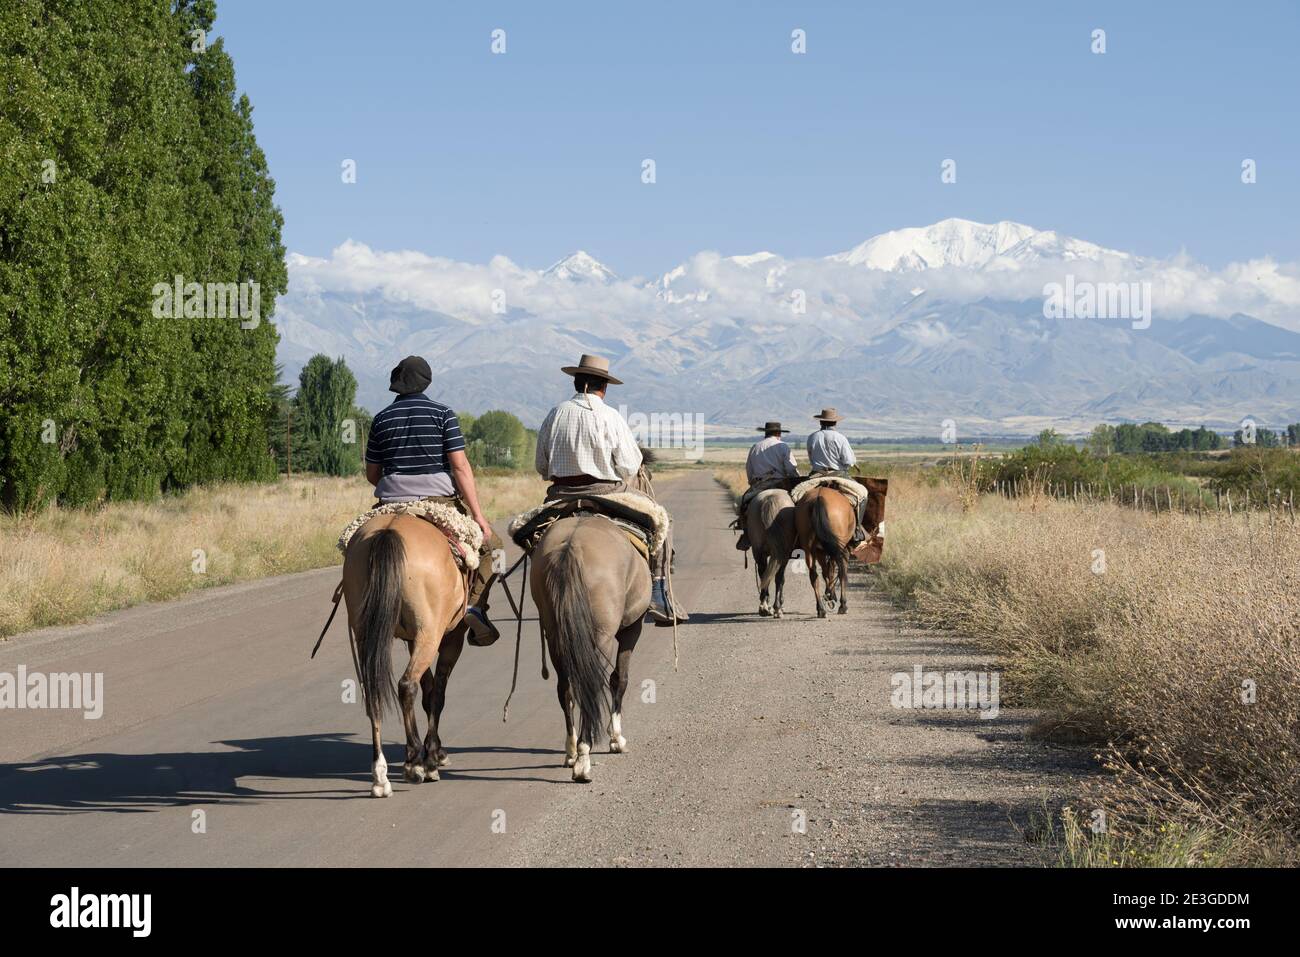 Gauchos riding horses in the wine route, near to the Andes mountains of Mendoza Argentina Stock Photo